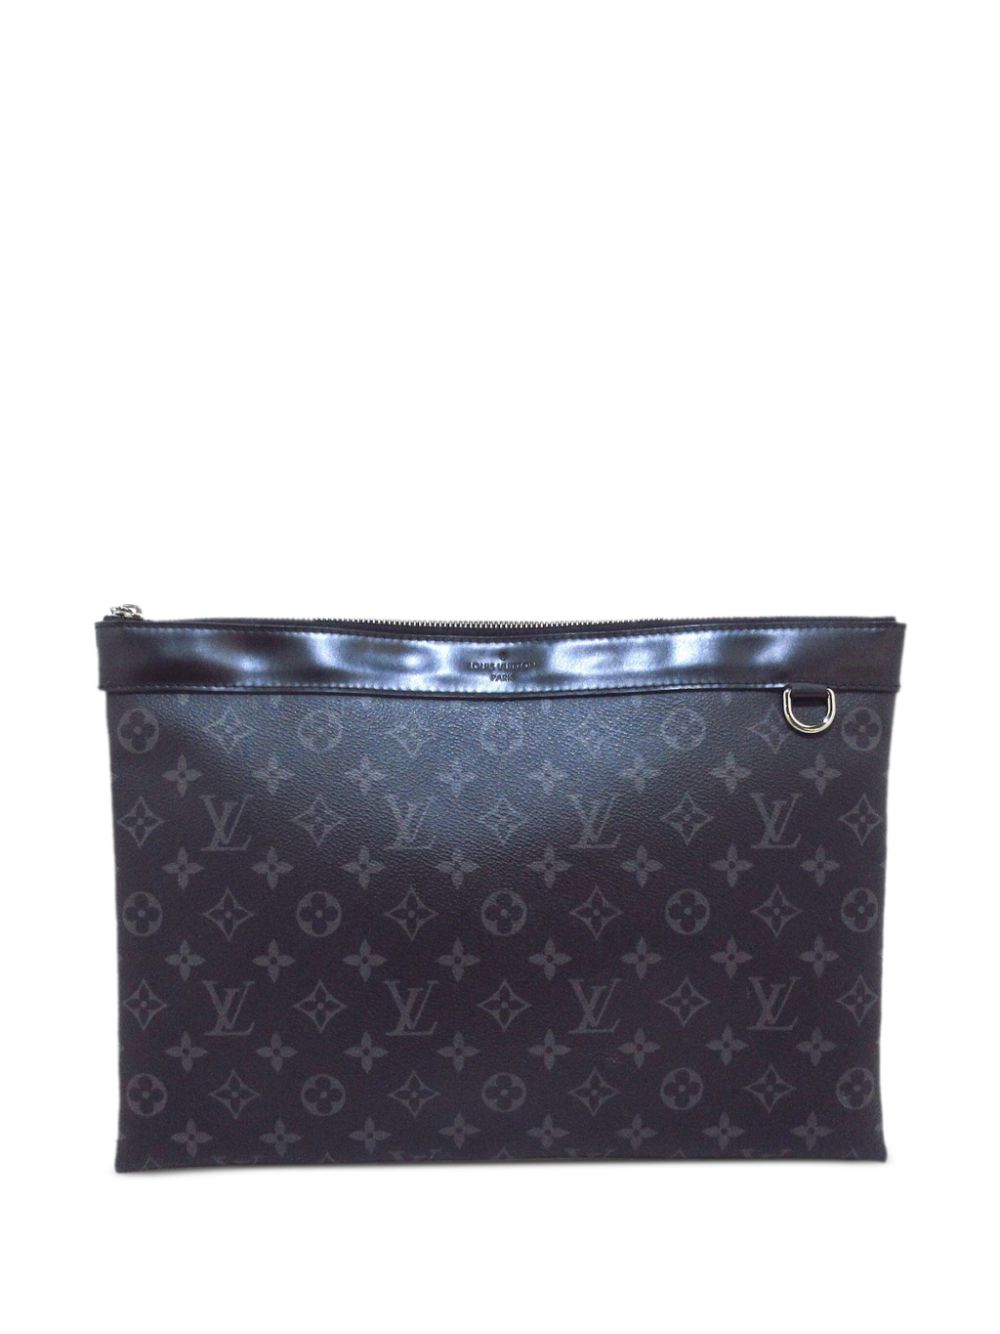 Pre-owned Louis Vuitton 2019 Discovery Pochette Gm Clutch Bag In Black